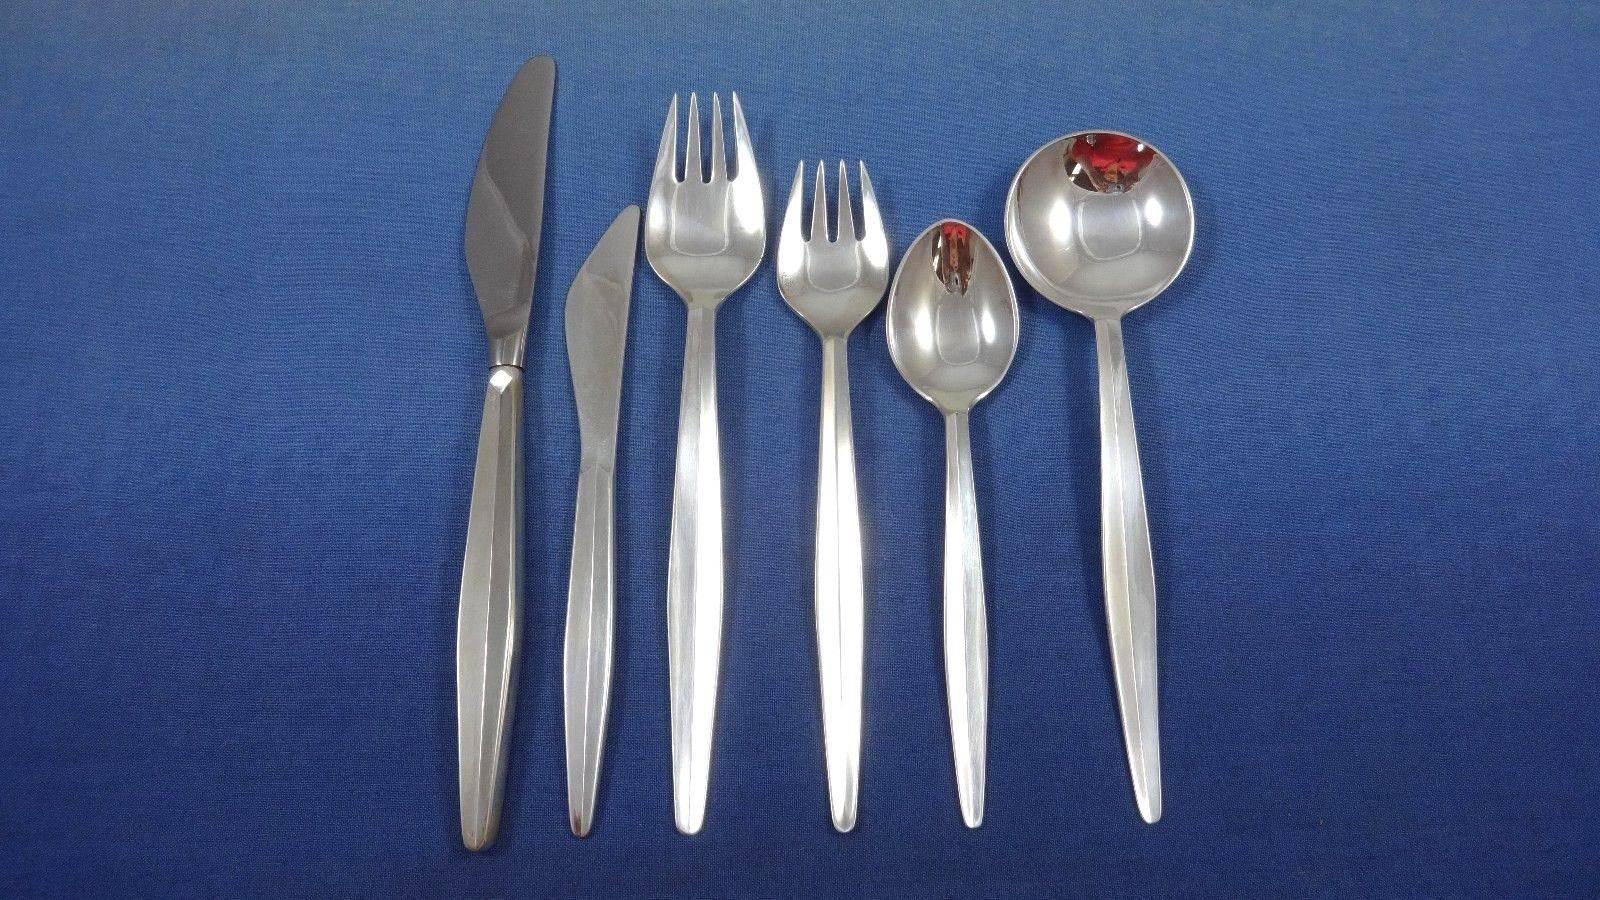 Renowned silversmith Mogensen was a silversmith in Denmark (Copenhagen) from 1949 to 1975. Orla Vagn Mogensen was also a top designer for Georg Jensen and produced some of the finest Danish silver. This pattern has a great Danish-Moderne